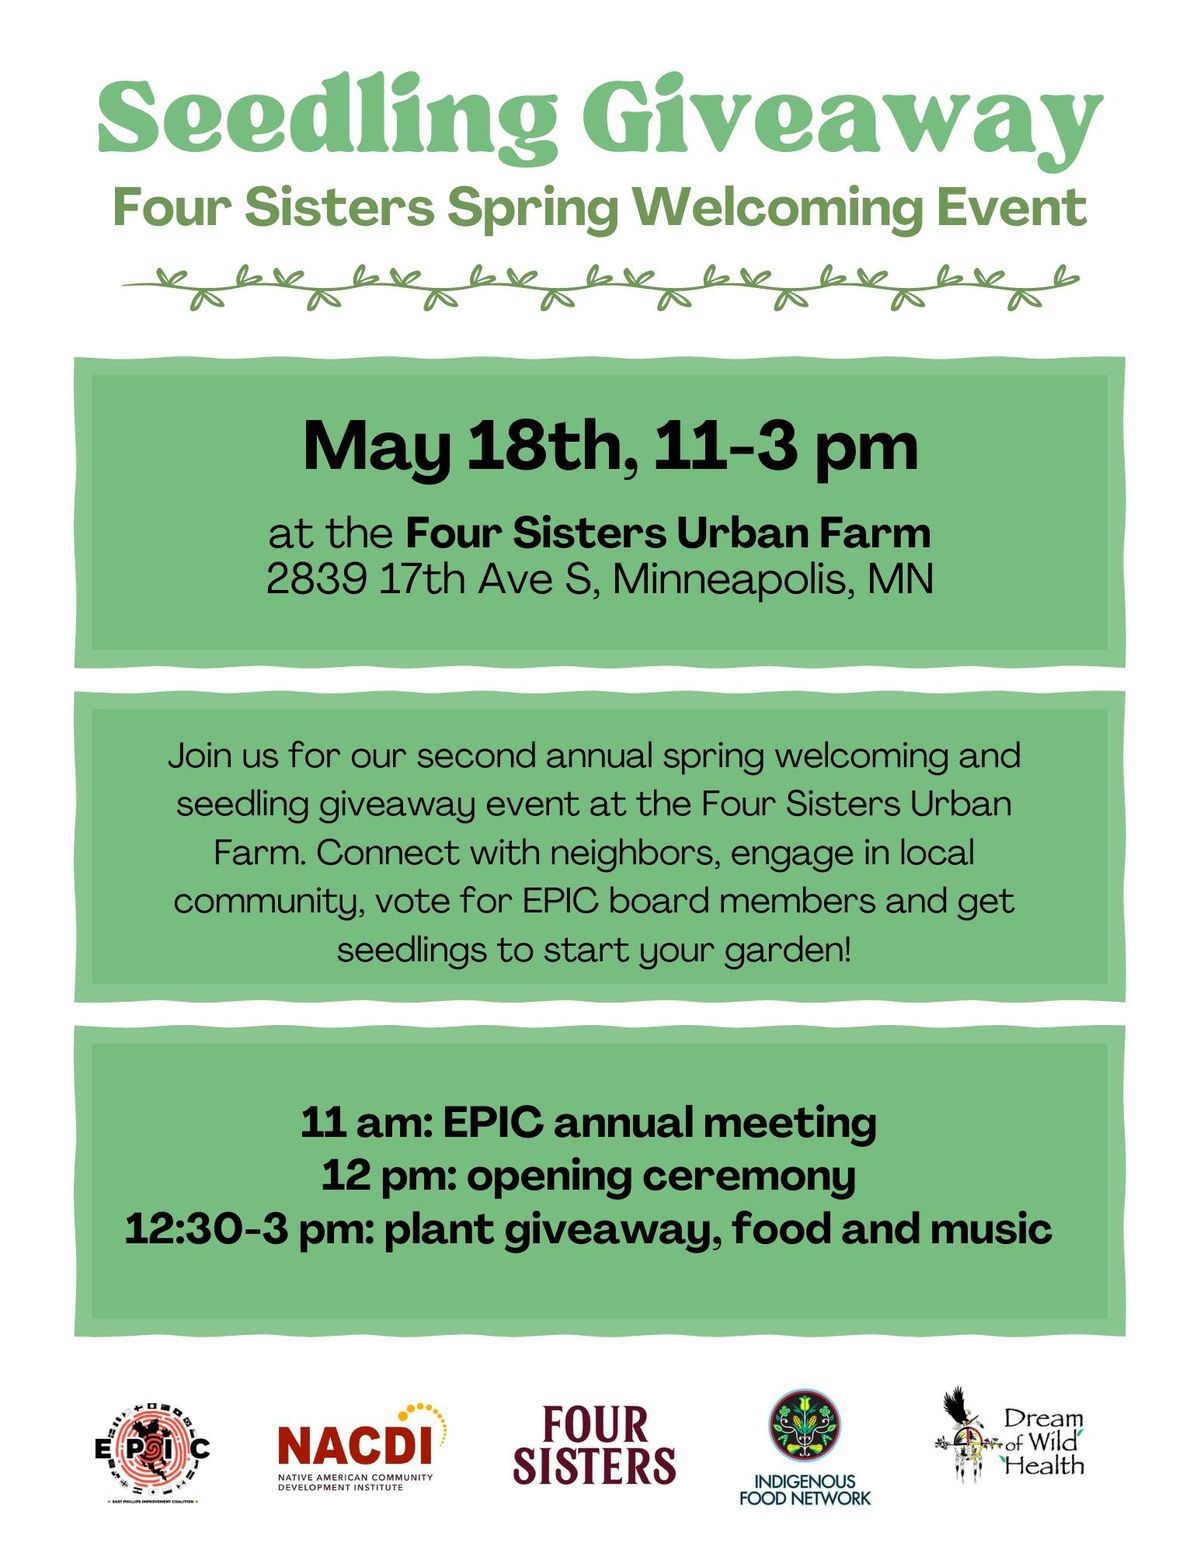 Seedling Giveaway: Four Sisters and EPIC Spring Welcoming Event